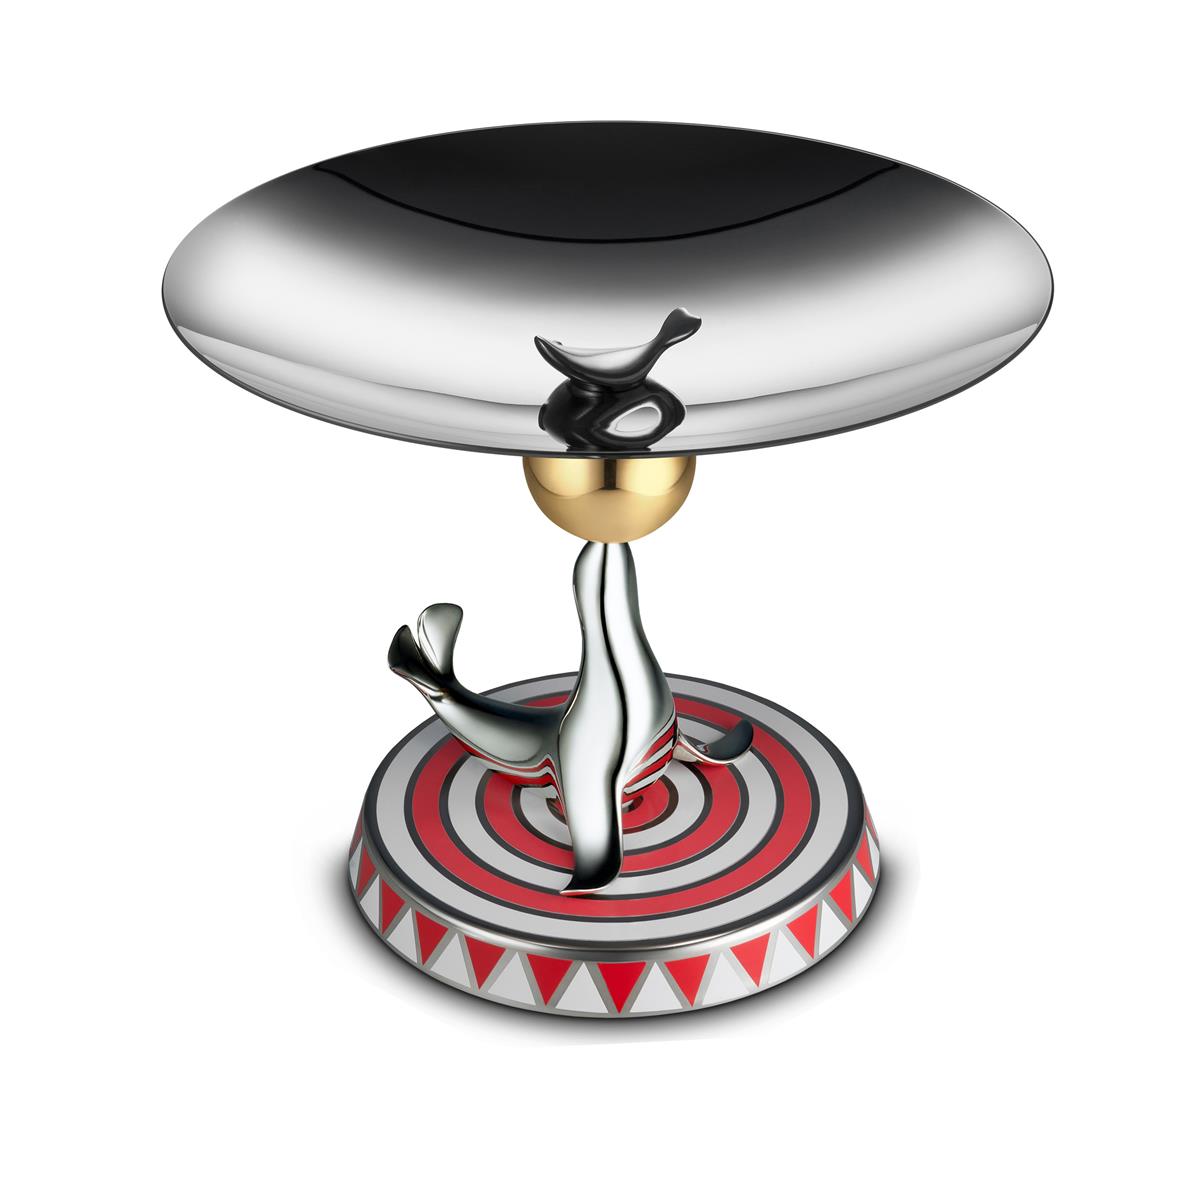 the seal cake stand in 18/10 stainless steel limited series of 999 numbered pieces